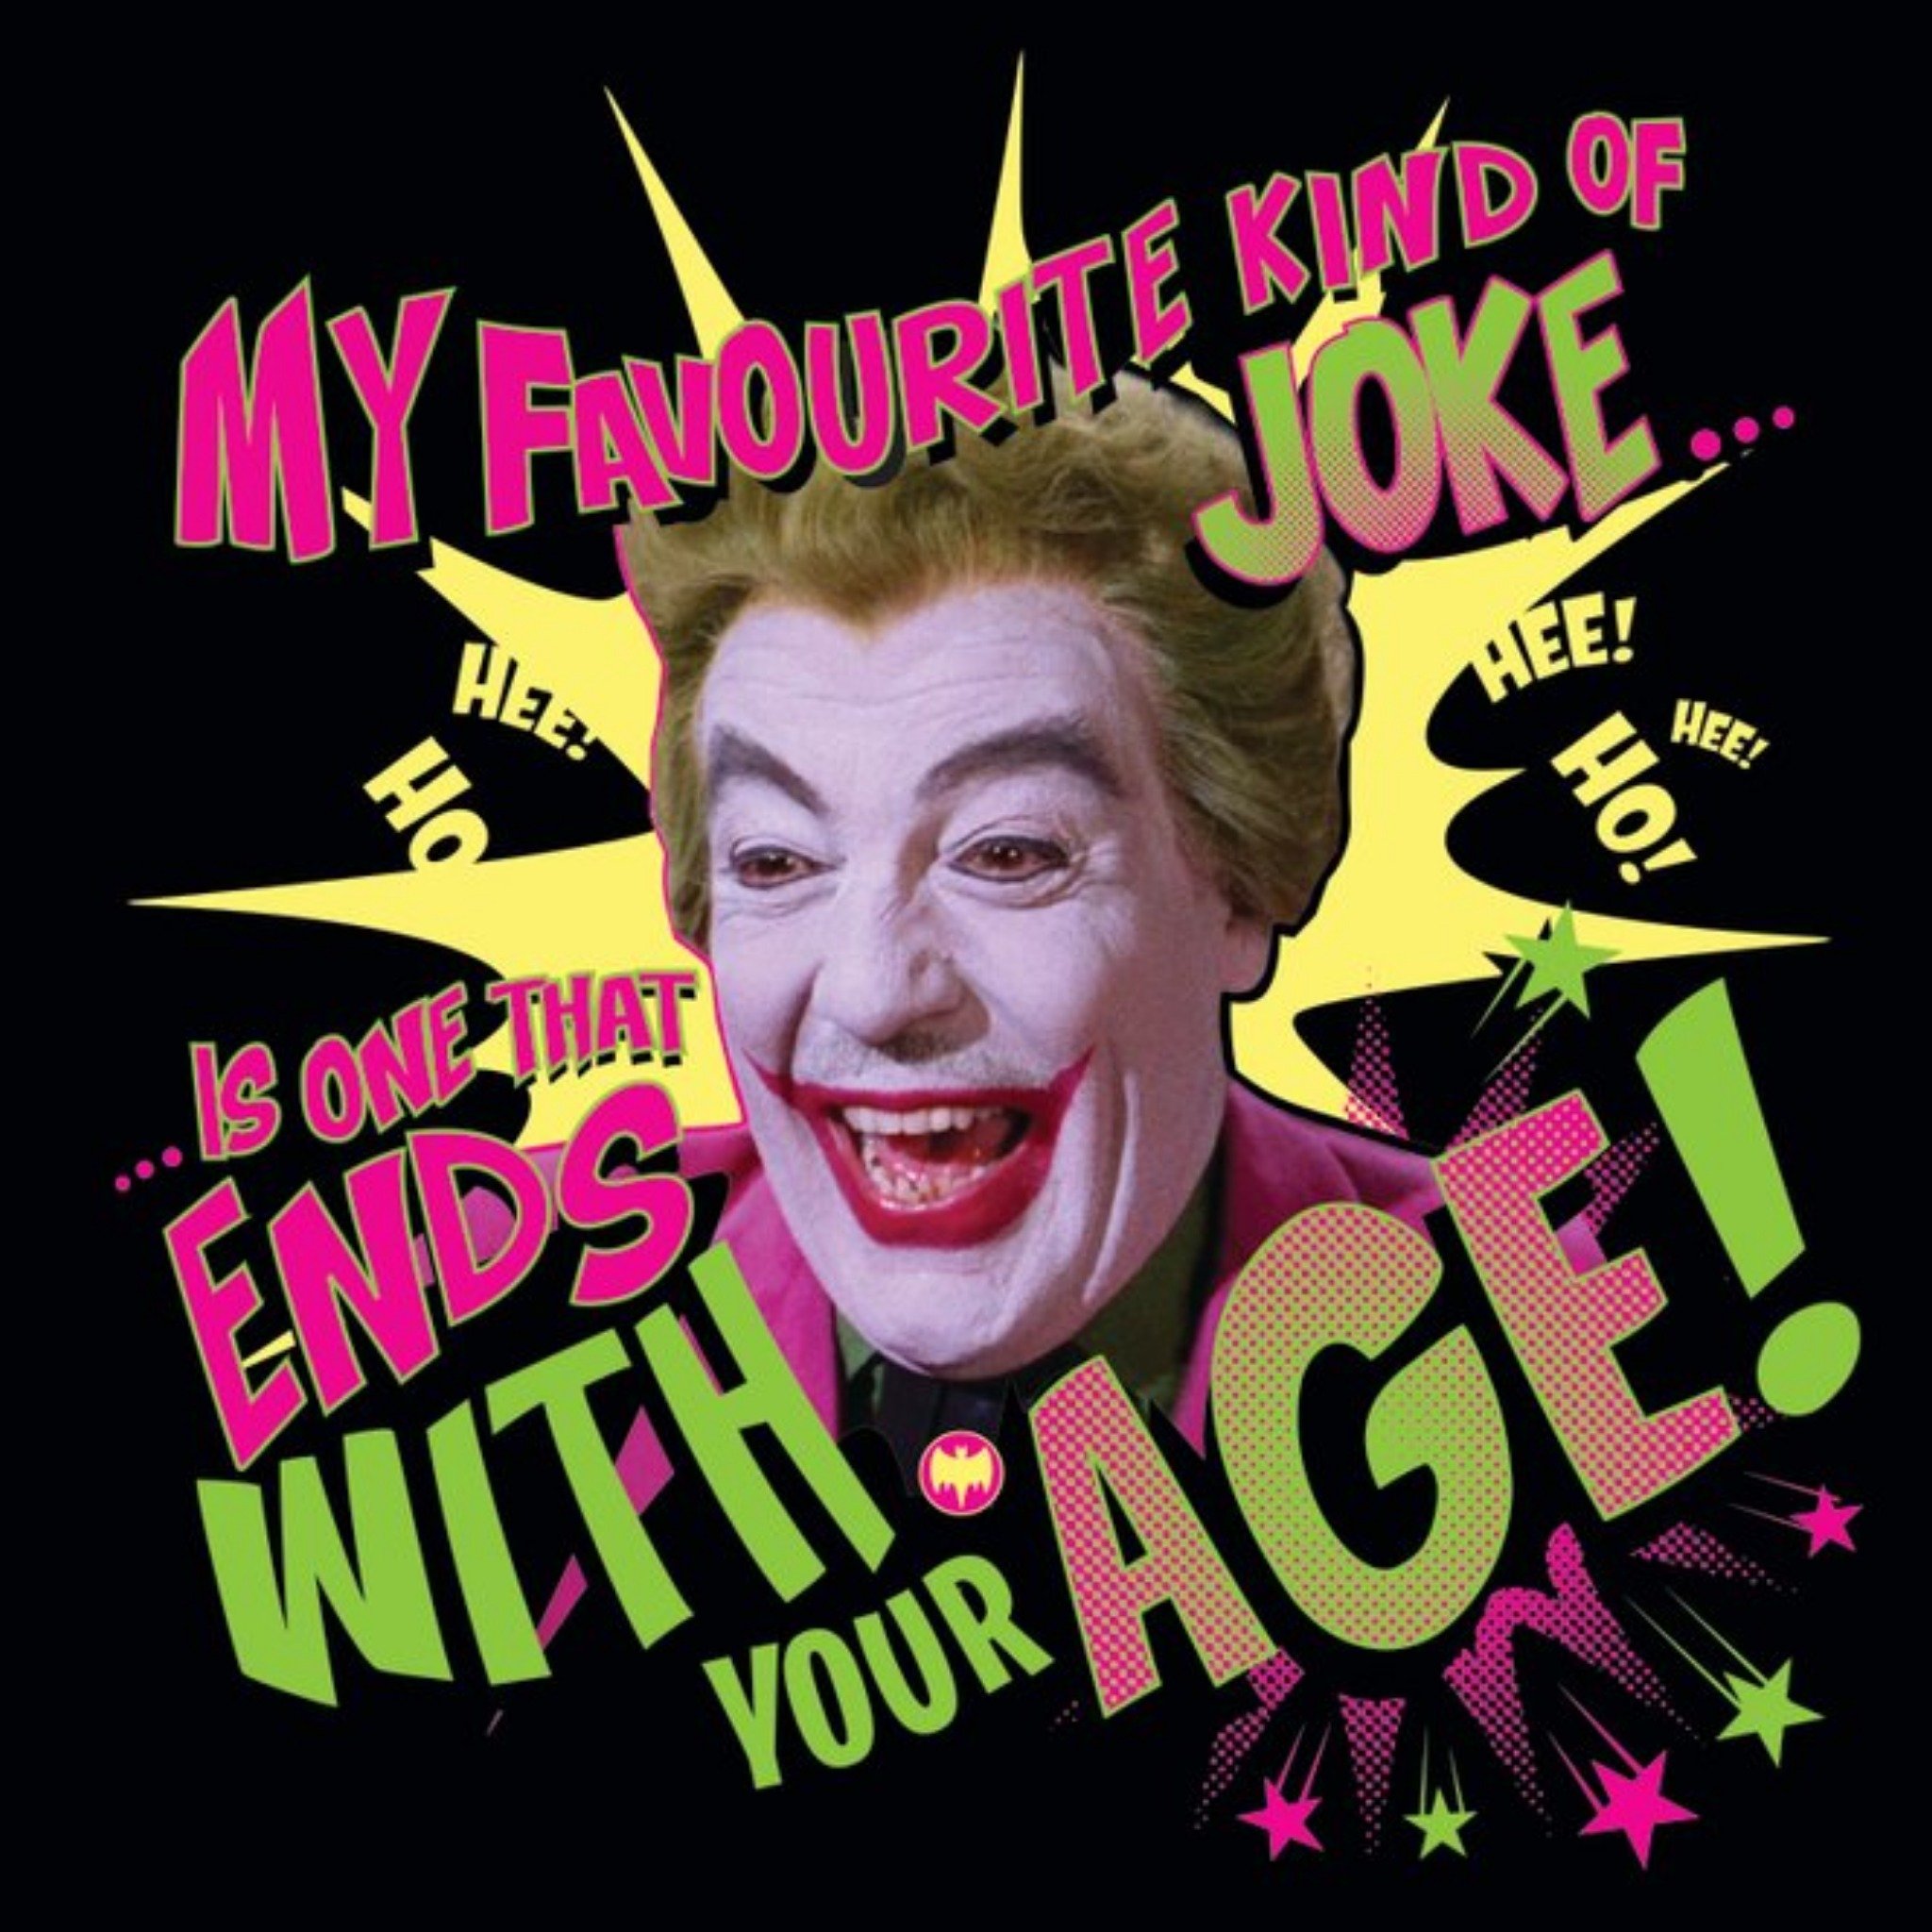 Batman My Favourite Kind Of Joke.. Is One That Ends With Your Age - The Joker, Square Card